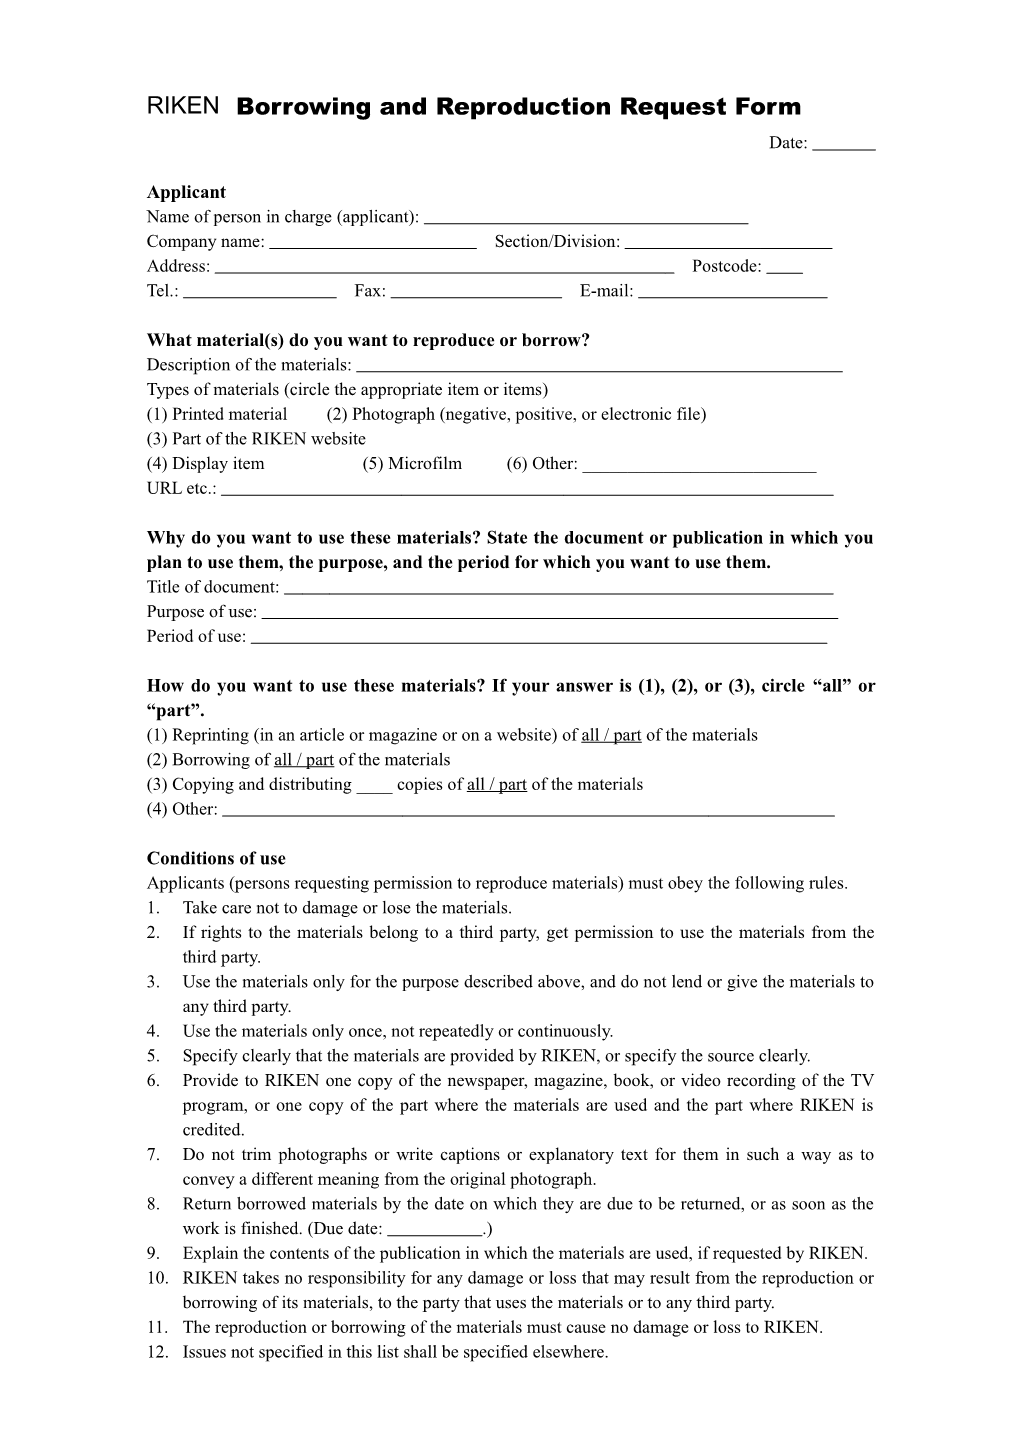 RIKEN Borrowing and Reproduction Request Form